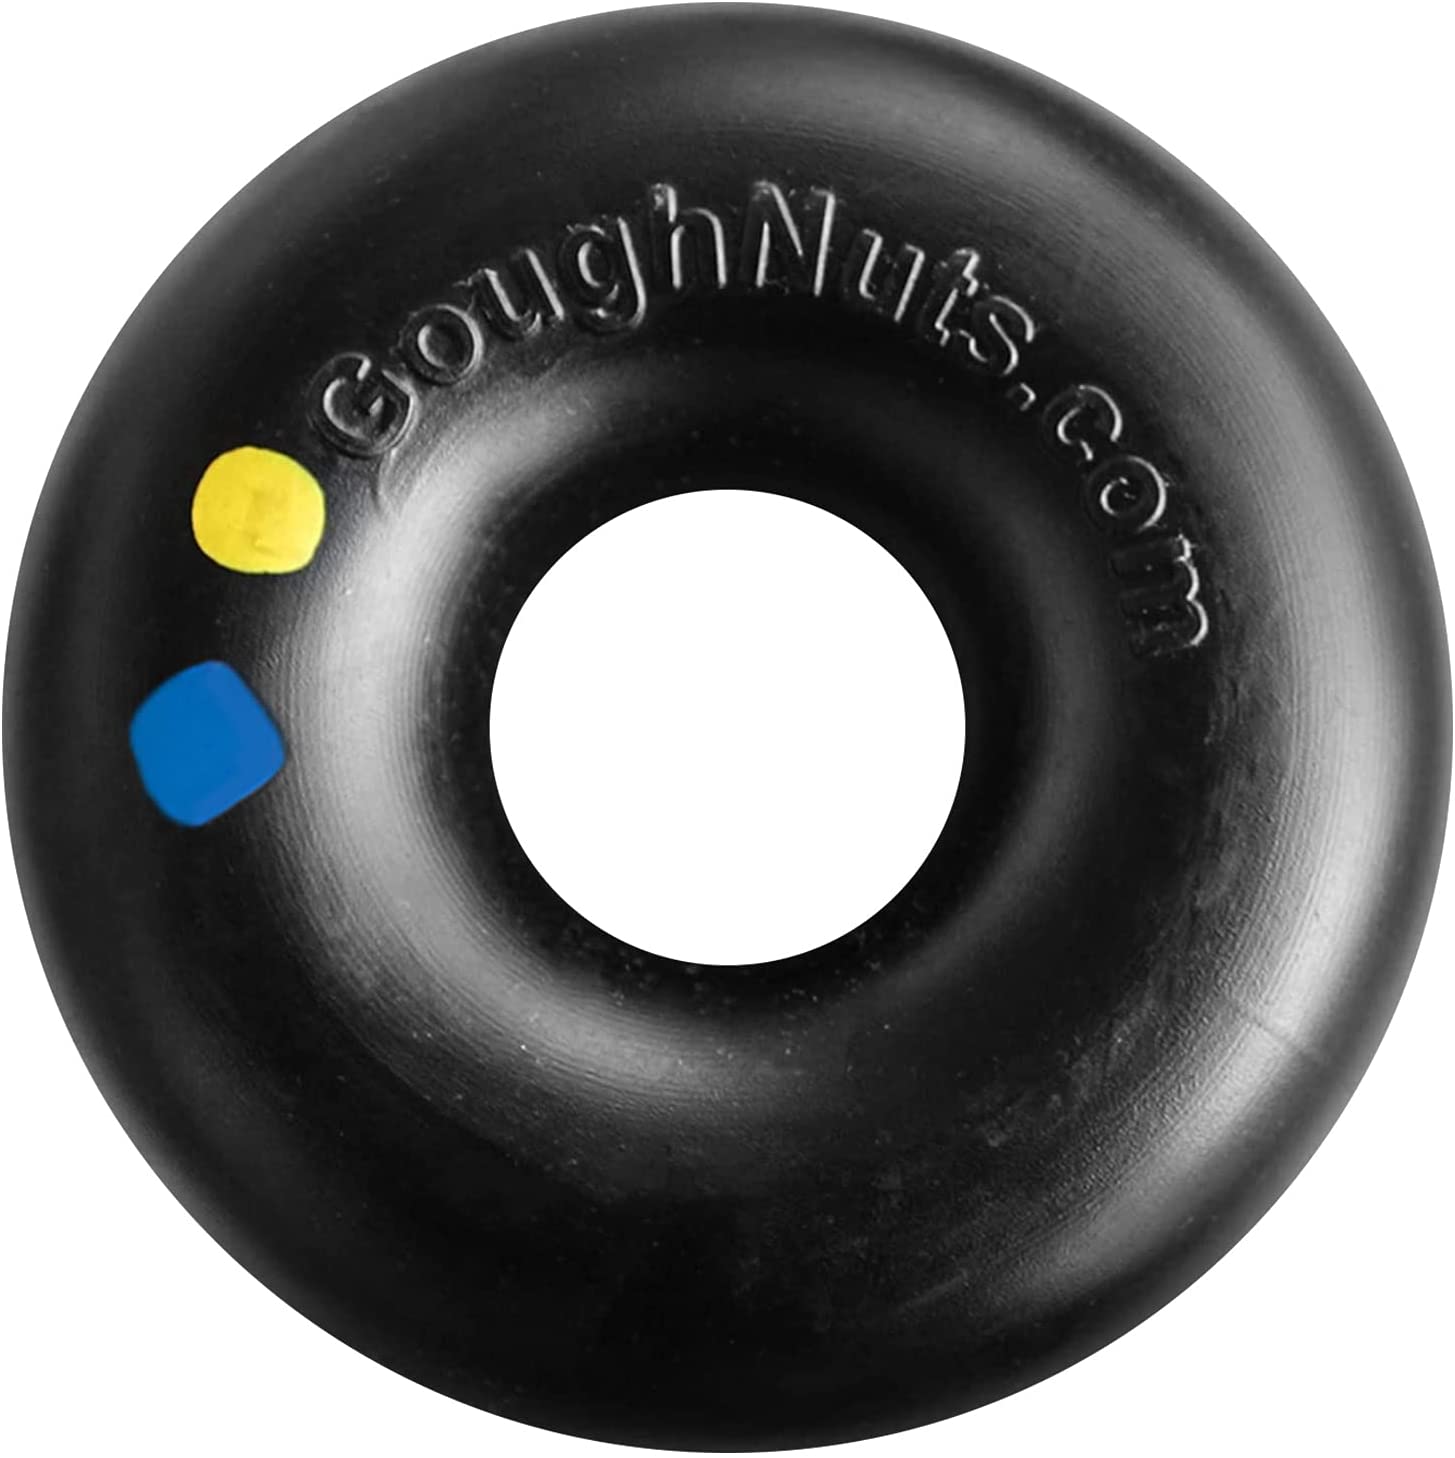 Goughnuts Extra Large Black "Buster" Heavy Duty Ring Dog Chew Toy